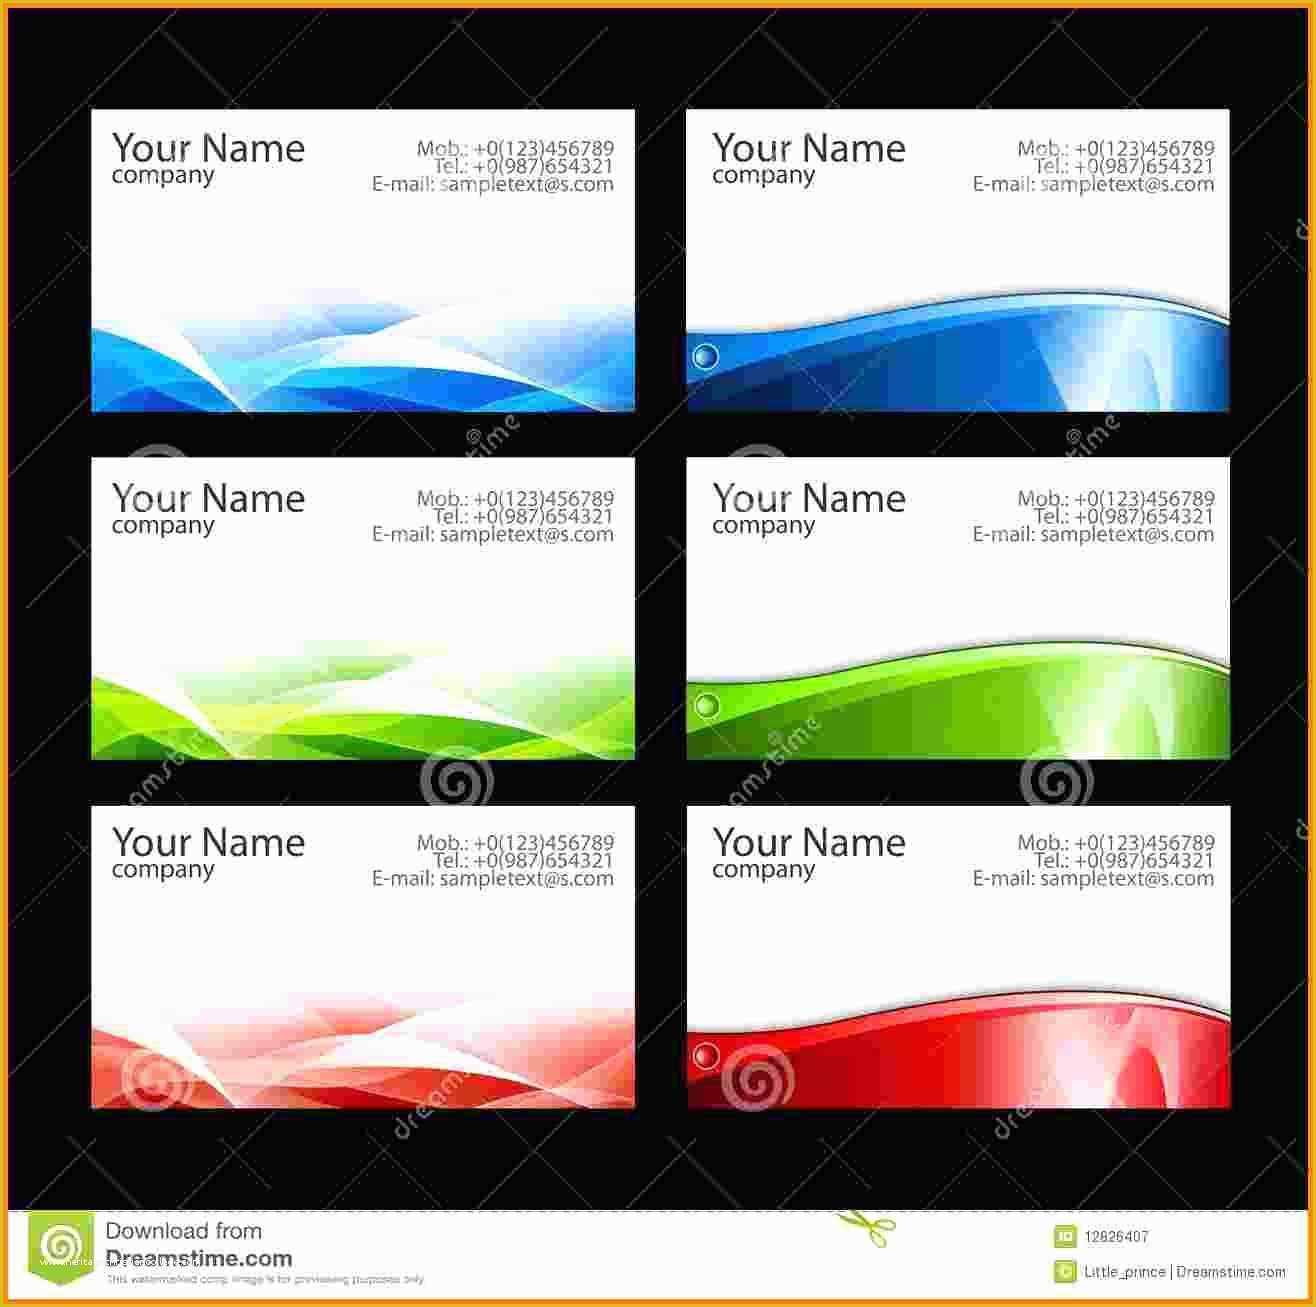 Free Avery Business Card Template Of Download Avery Business Cards Template